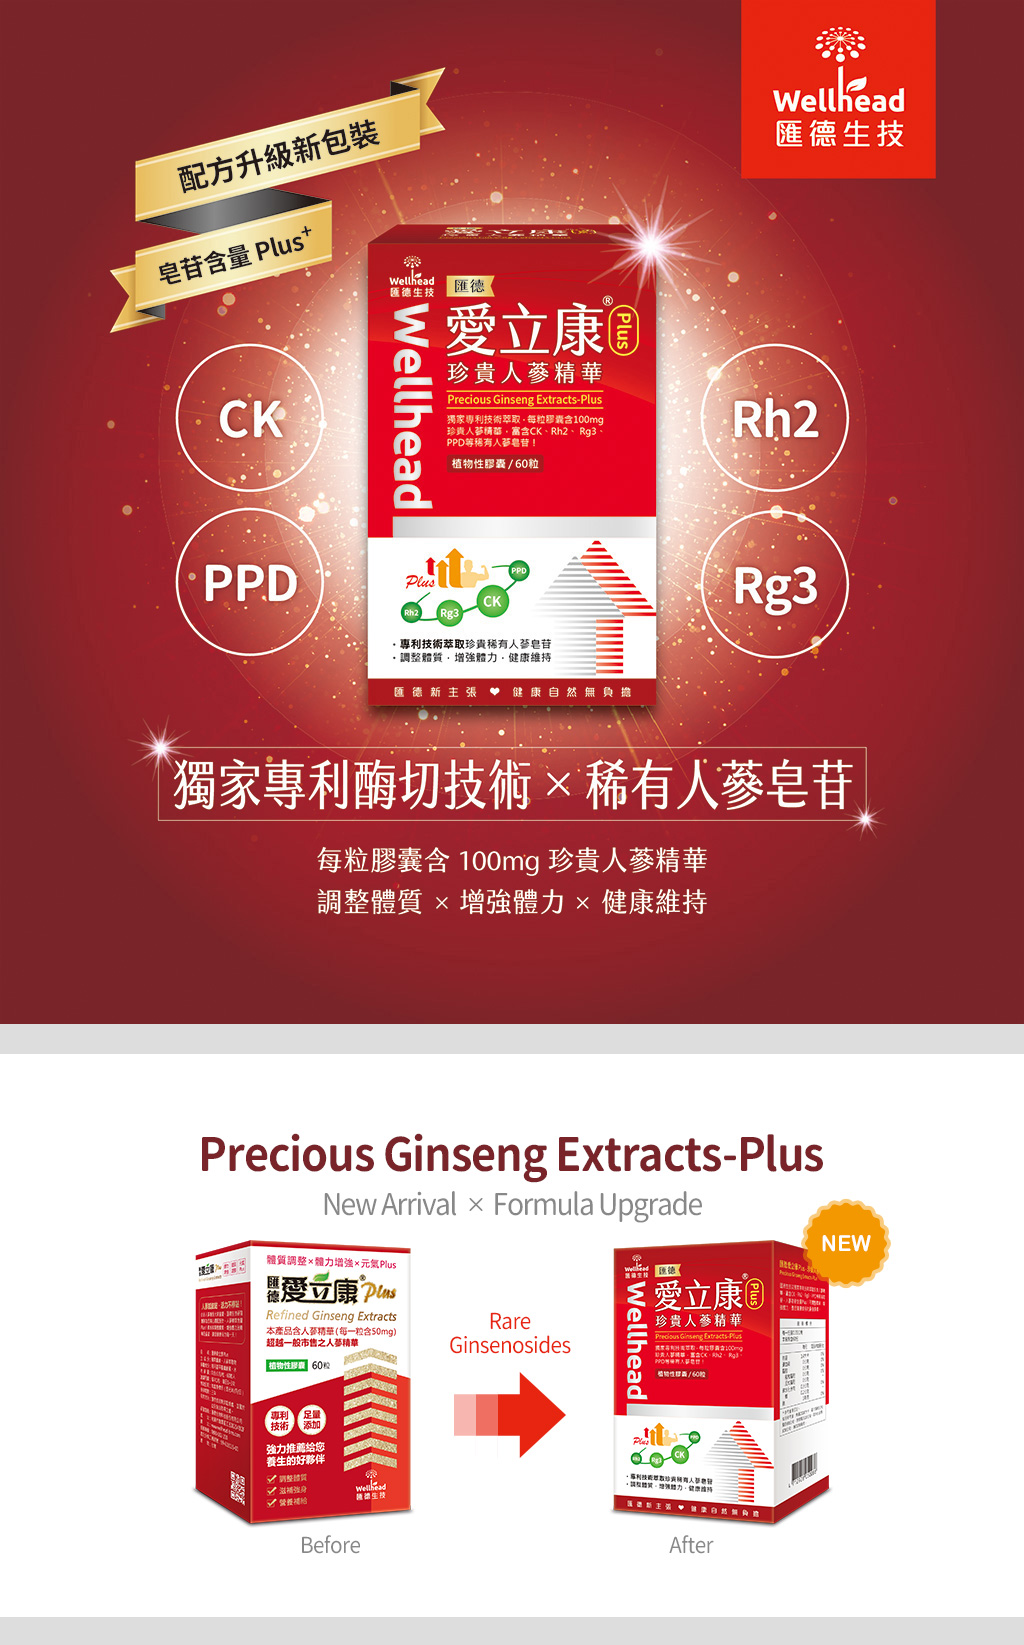 [ New Arrival ] Precious Ginseng Extracts-Plus: Rare Ginsenosides